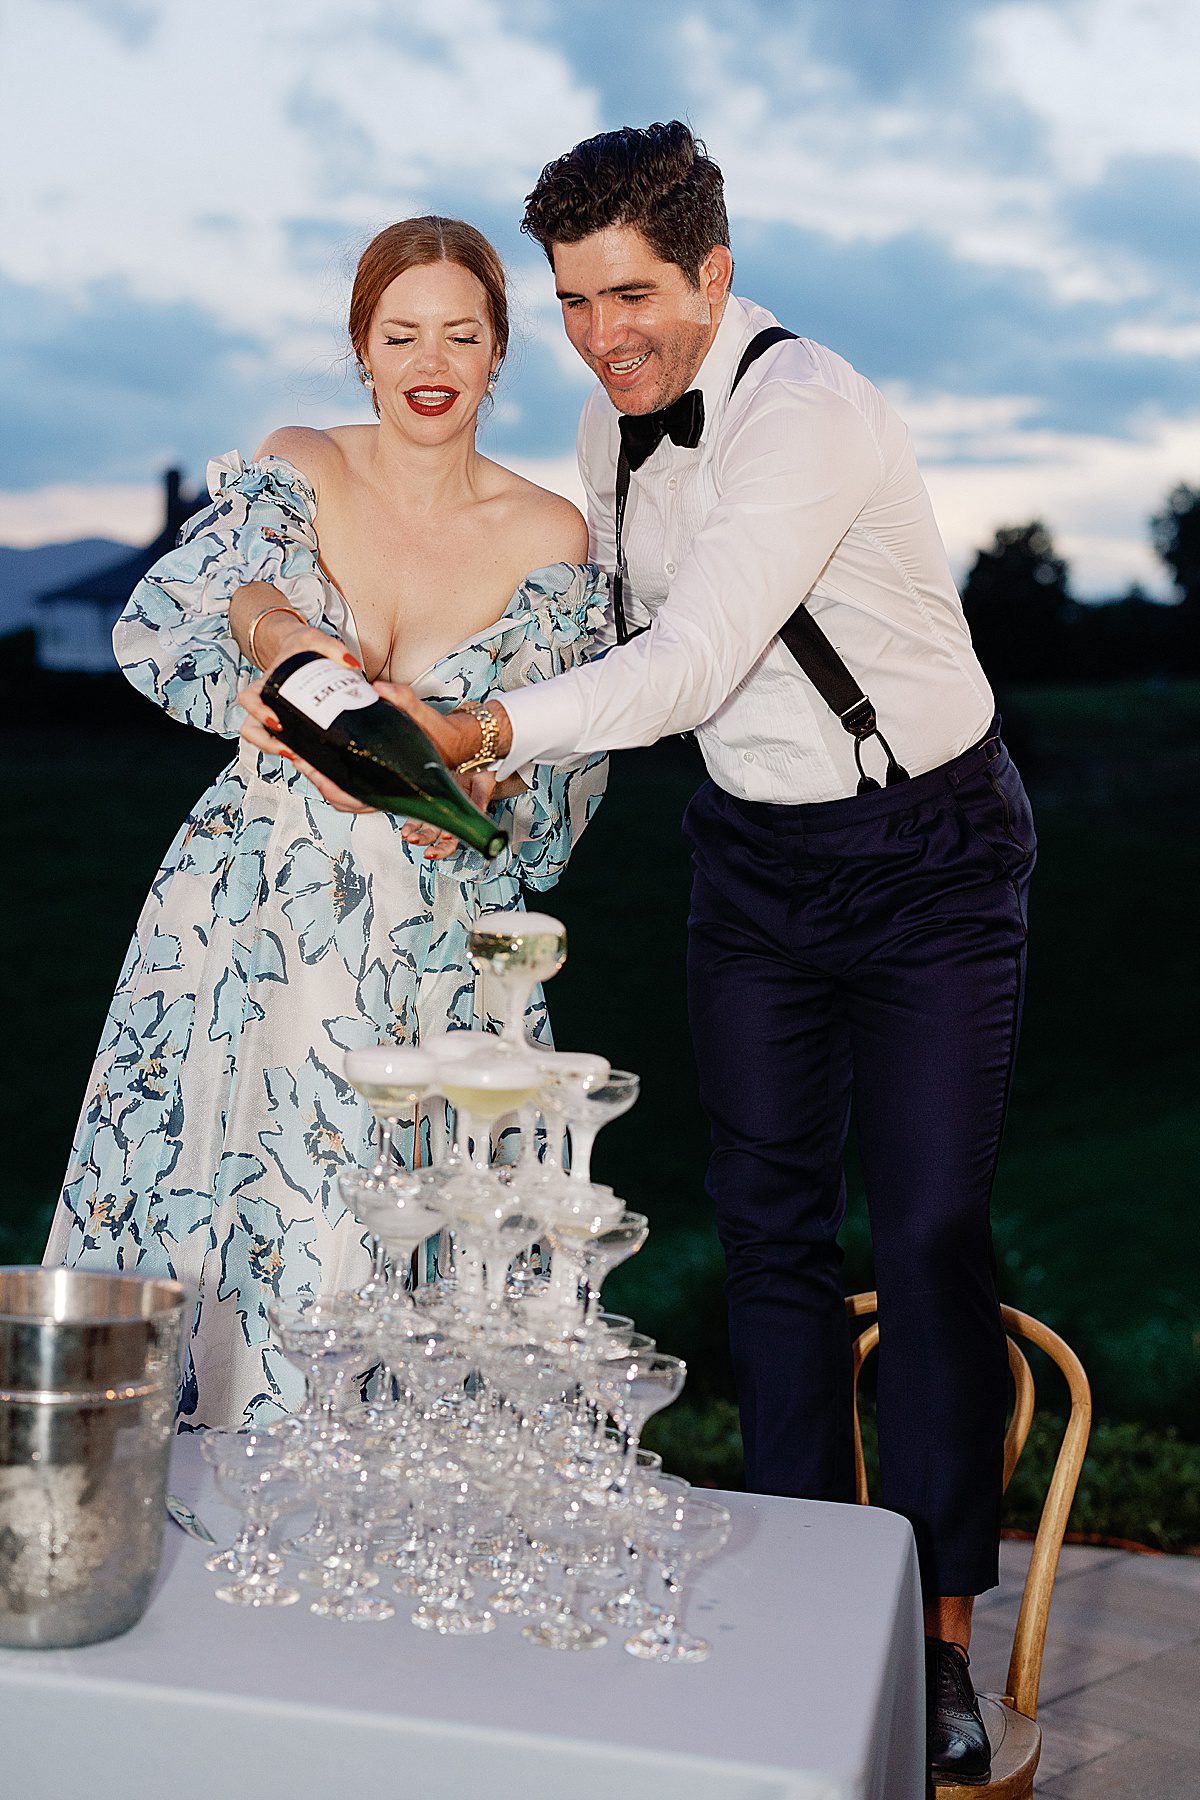 Bride and Groom Pouring Champagne Tower at Wedding Reception Photo